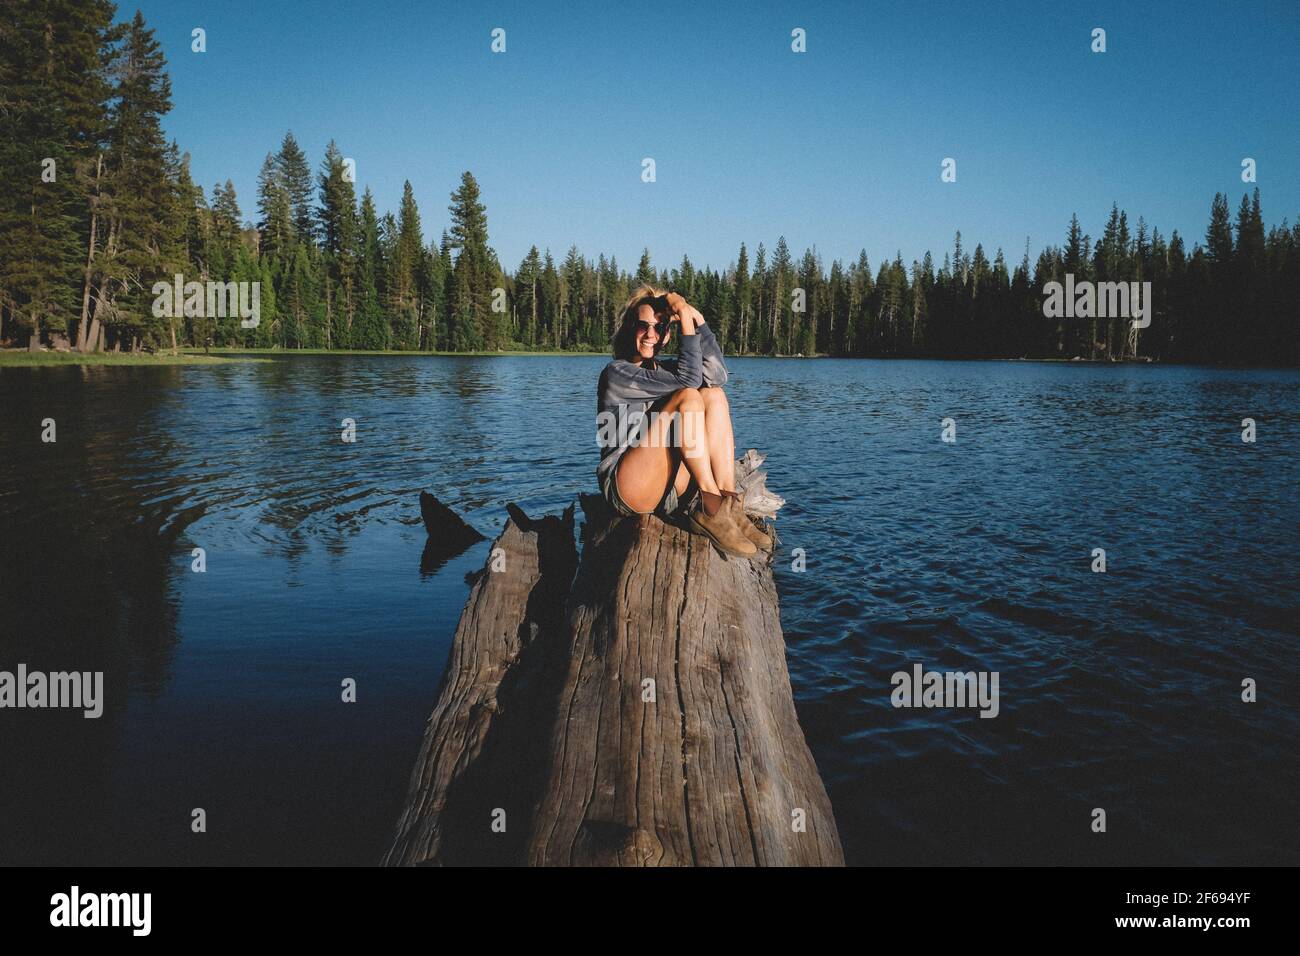 Blonde Woman Poses on a log over water at Sunset. Stock Photo